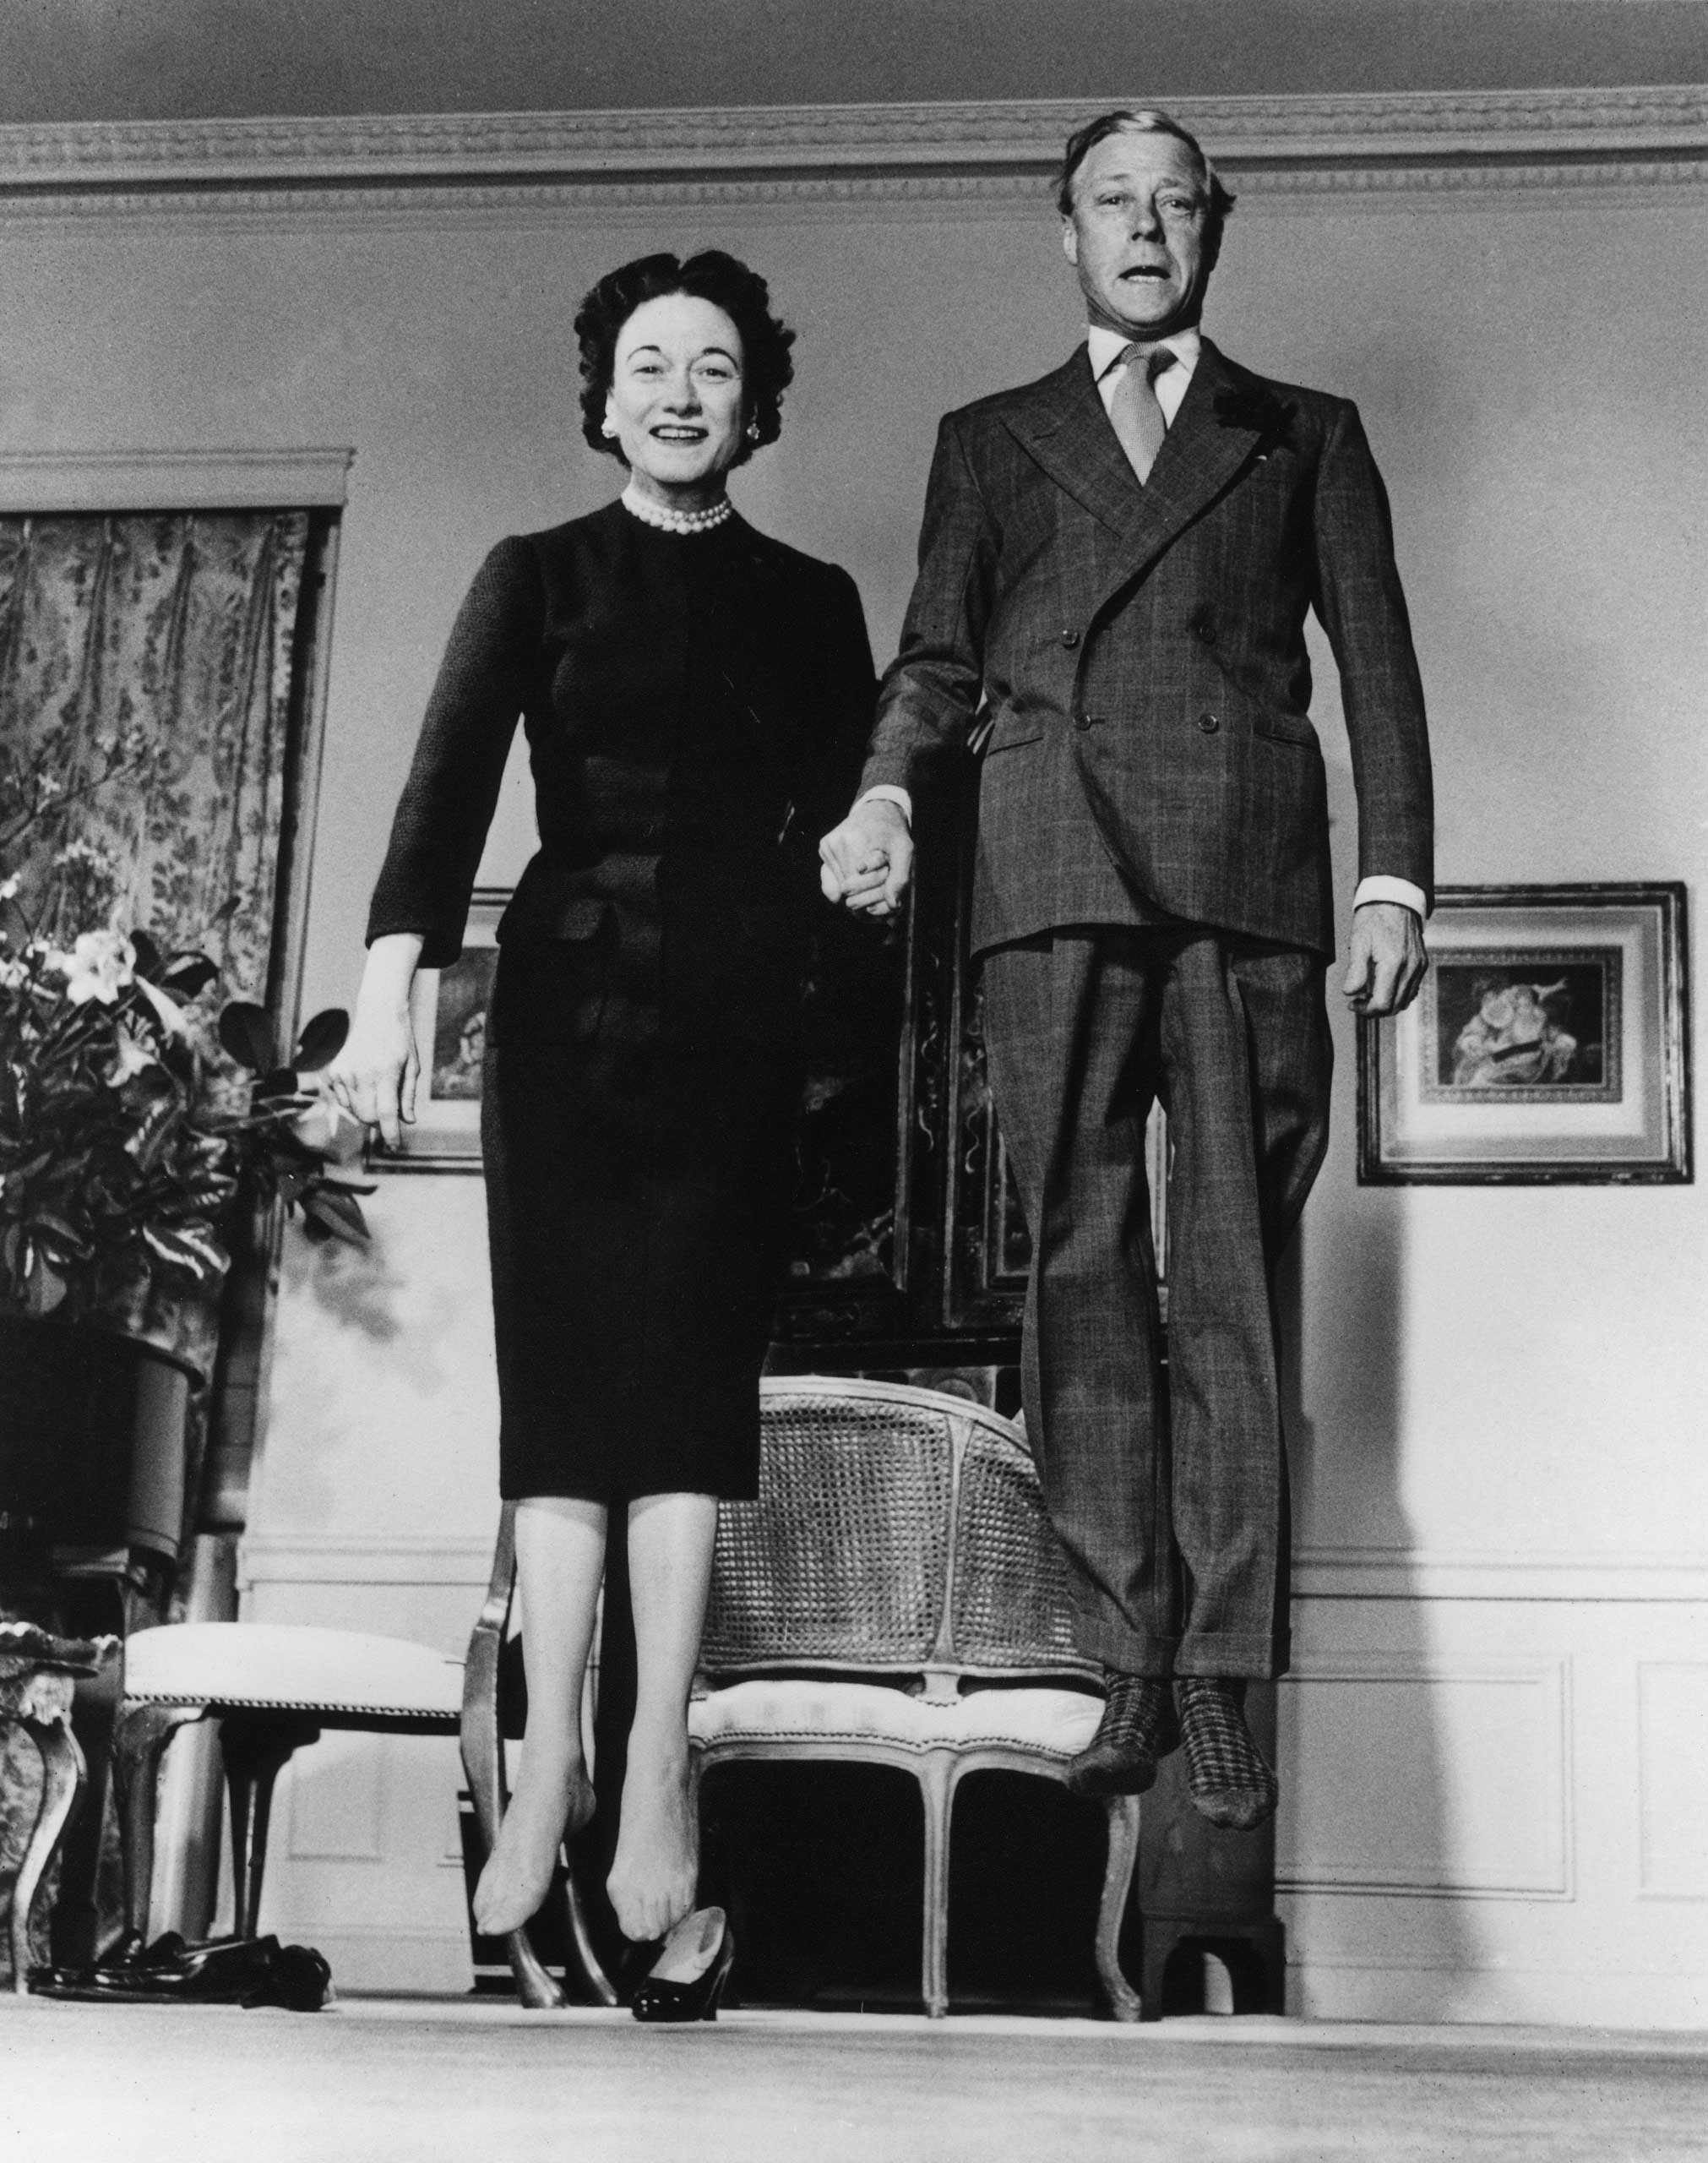 The Duke and Duchess of Windsor jump for photographer Philippe Halsman. Originally published in the November 9, 1959, issue of LIFE